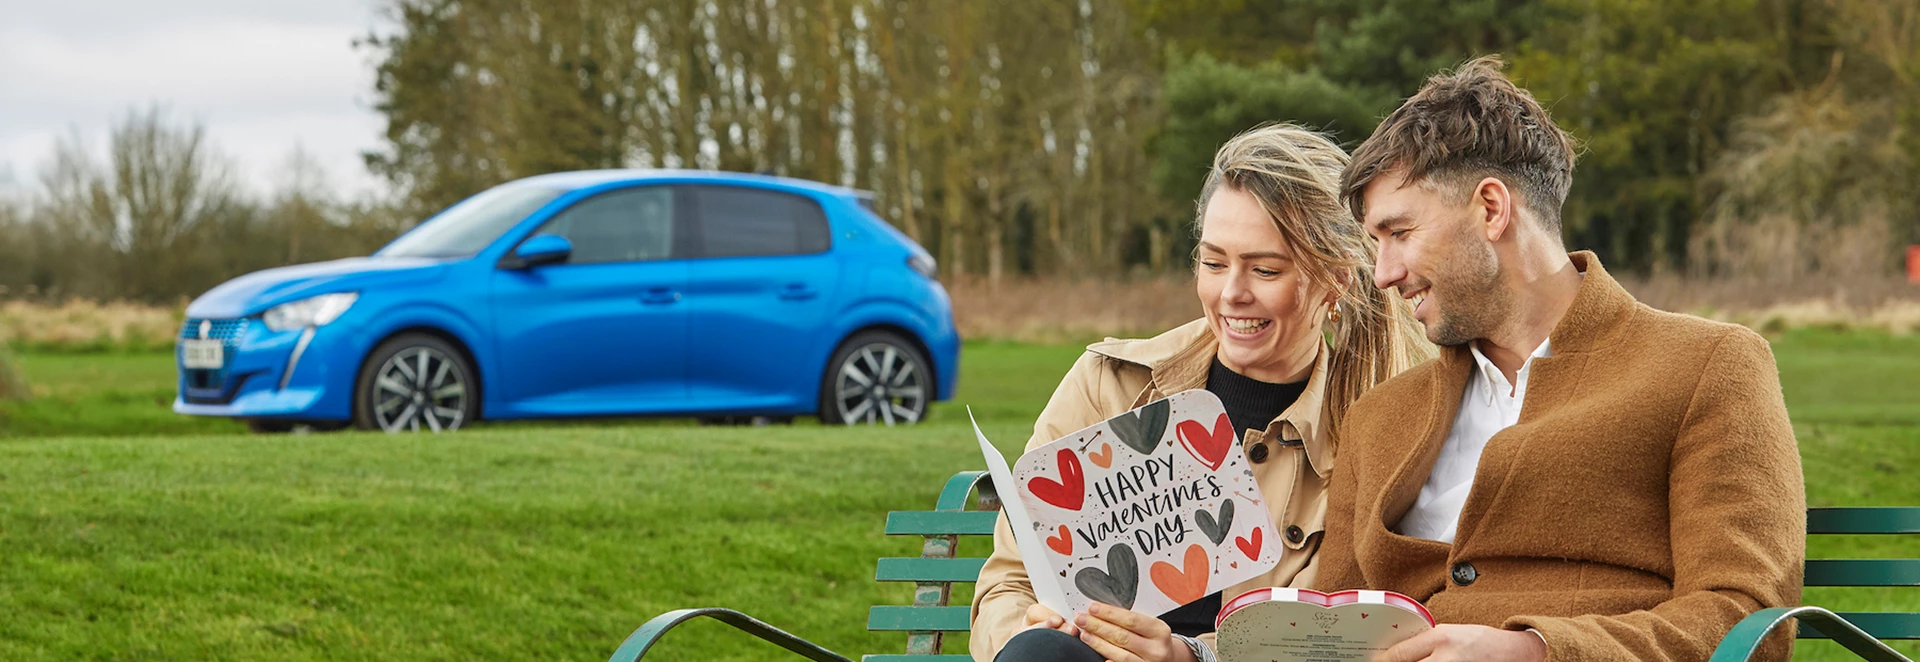 Majority of long-distance couples could use an EV to visit their partner without charging